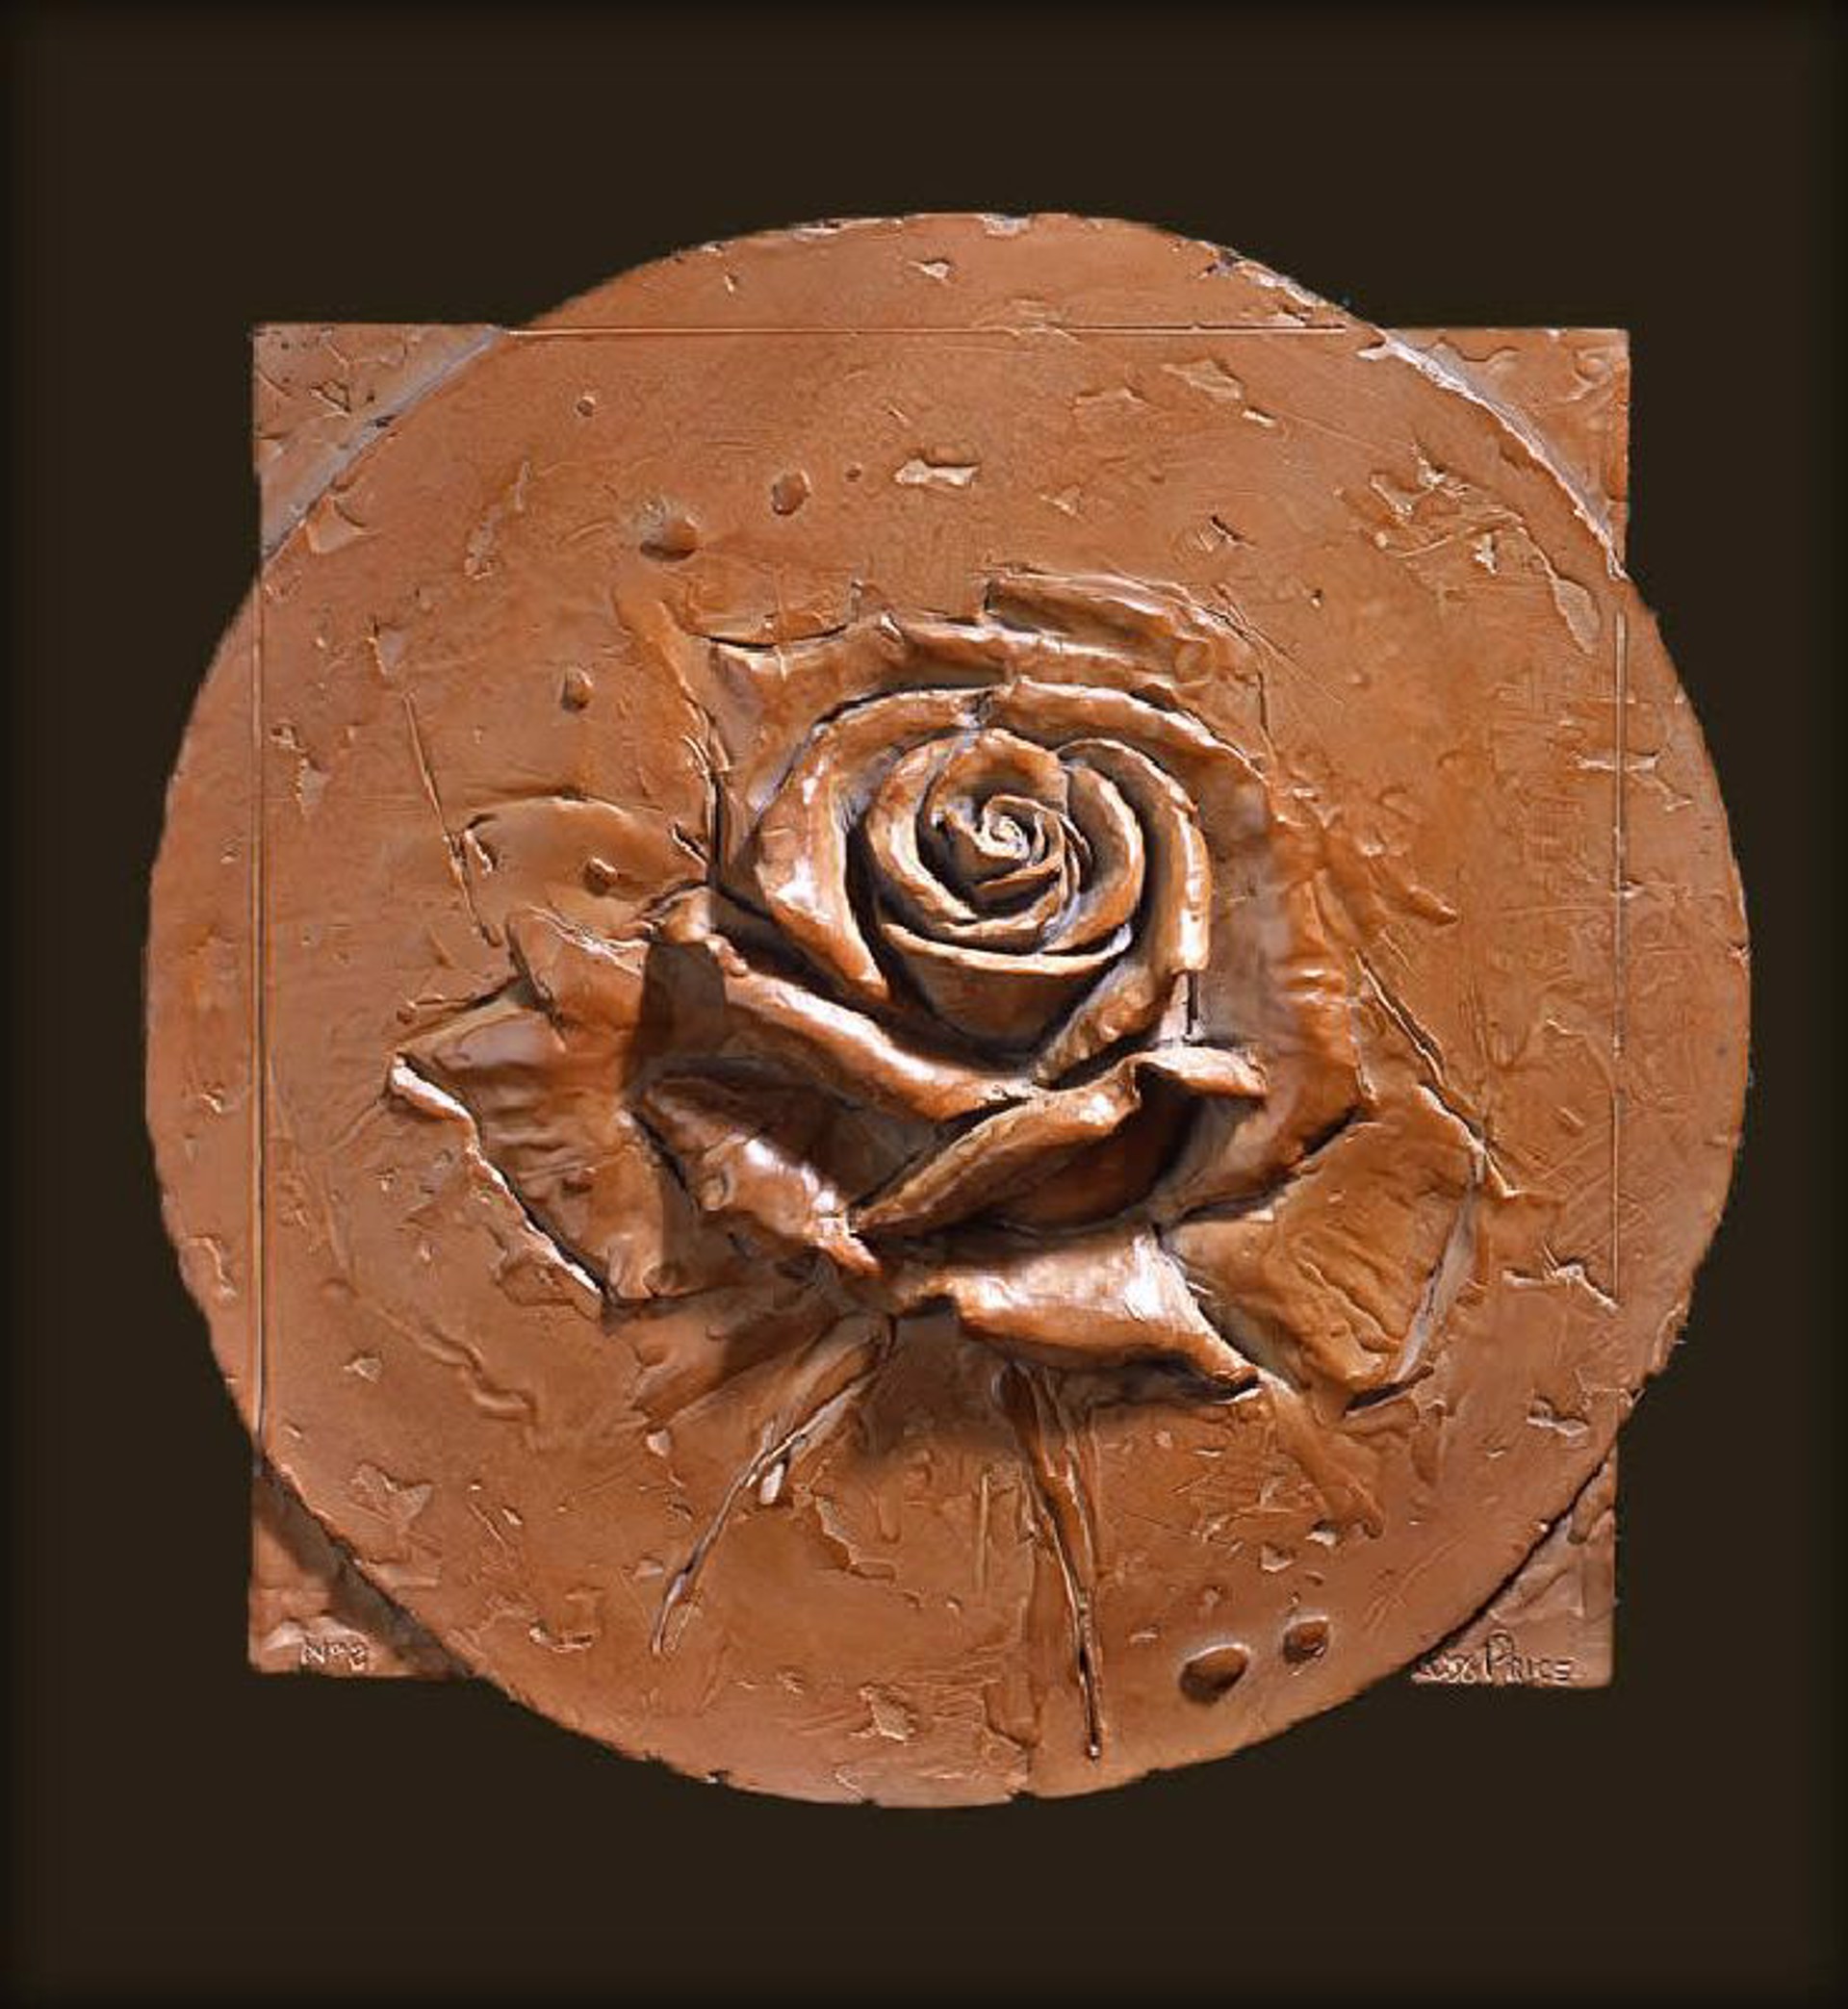 Rose by Gary Lee Price (sculptor)